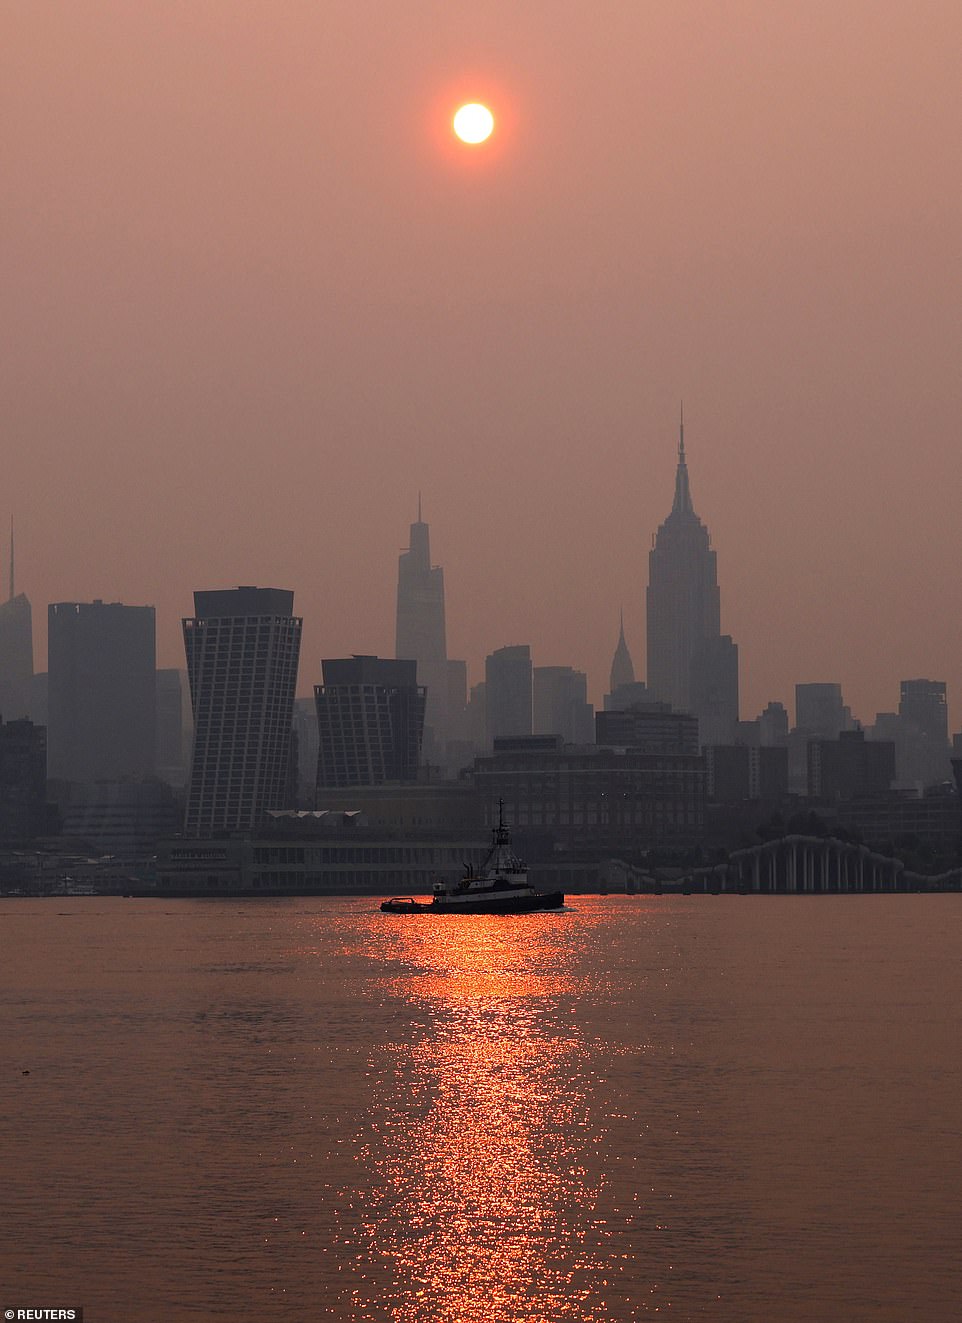 New York City was blanketed by a thick sheet of smoke Tuesday evening due to record wildfires in Canada